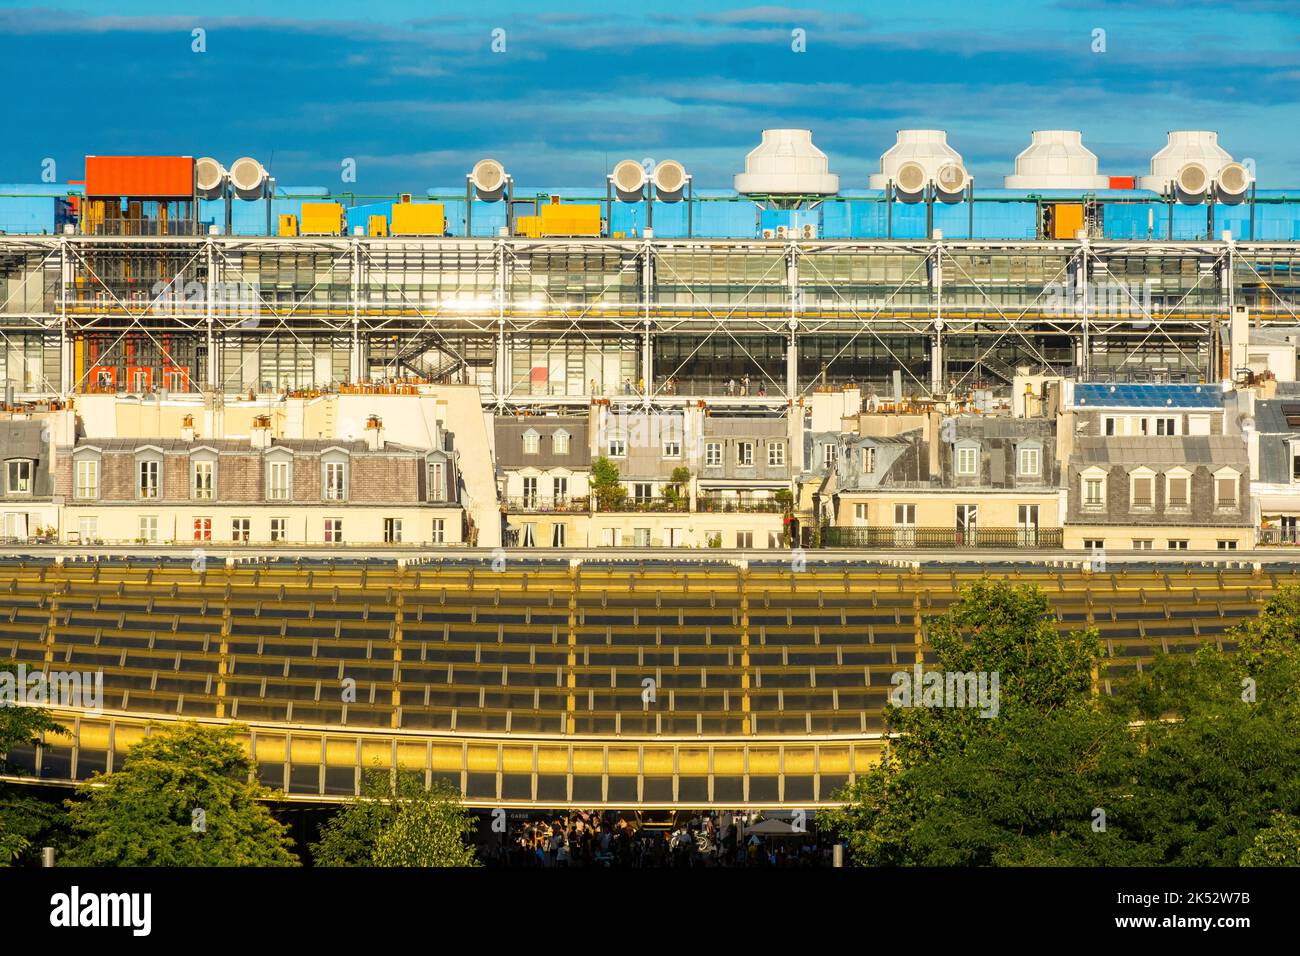 France, Paris, the canonry of the Forum des Halles and the Georges Pompidou center Stock Photo